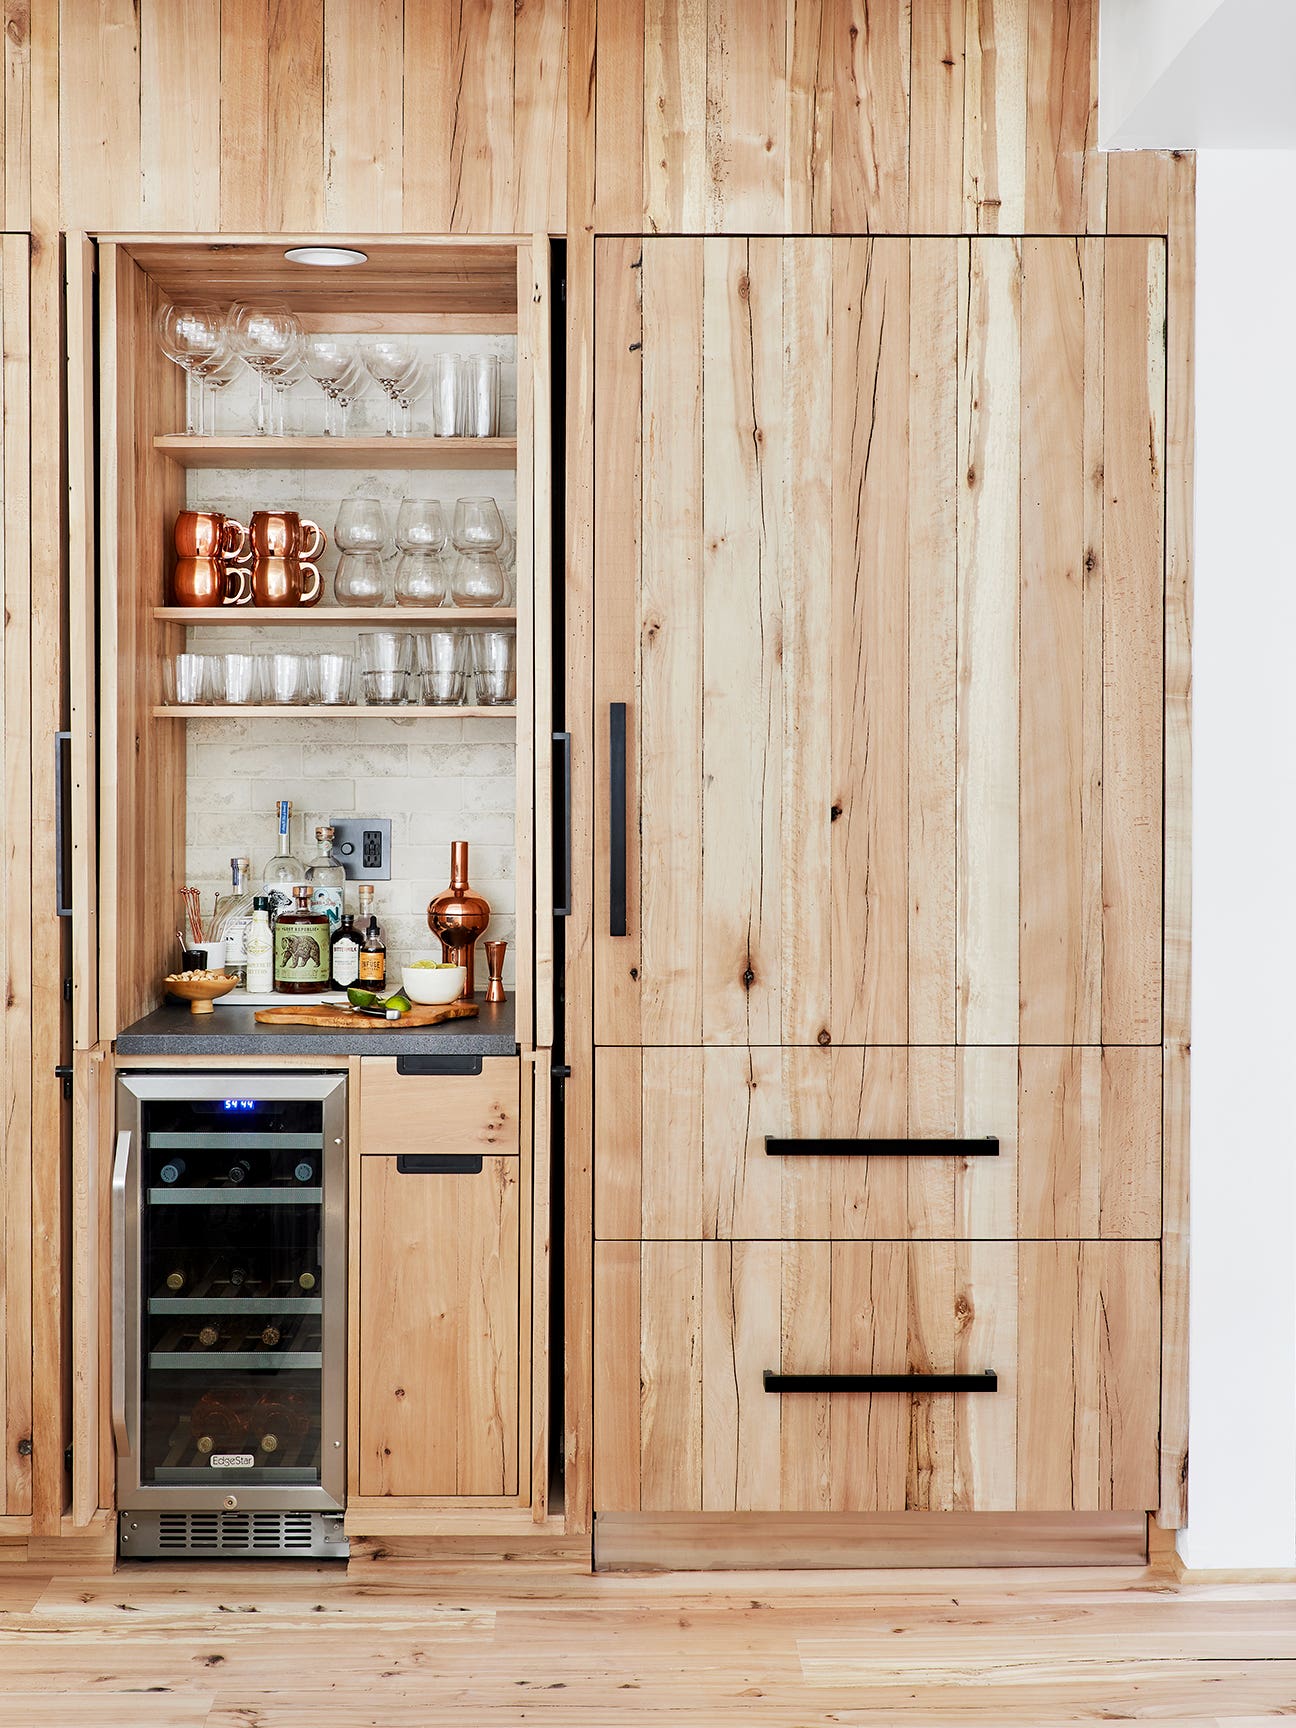 shot of the outside of a wood refrigerator with a bar nook next to it